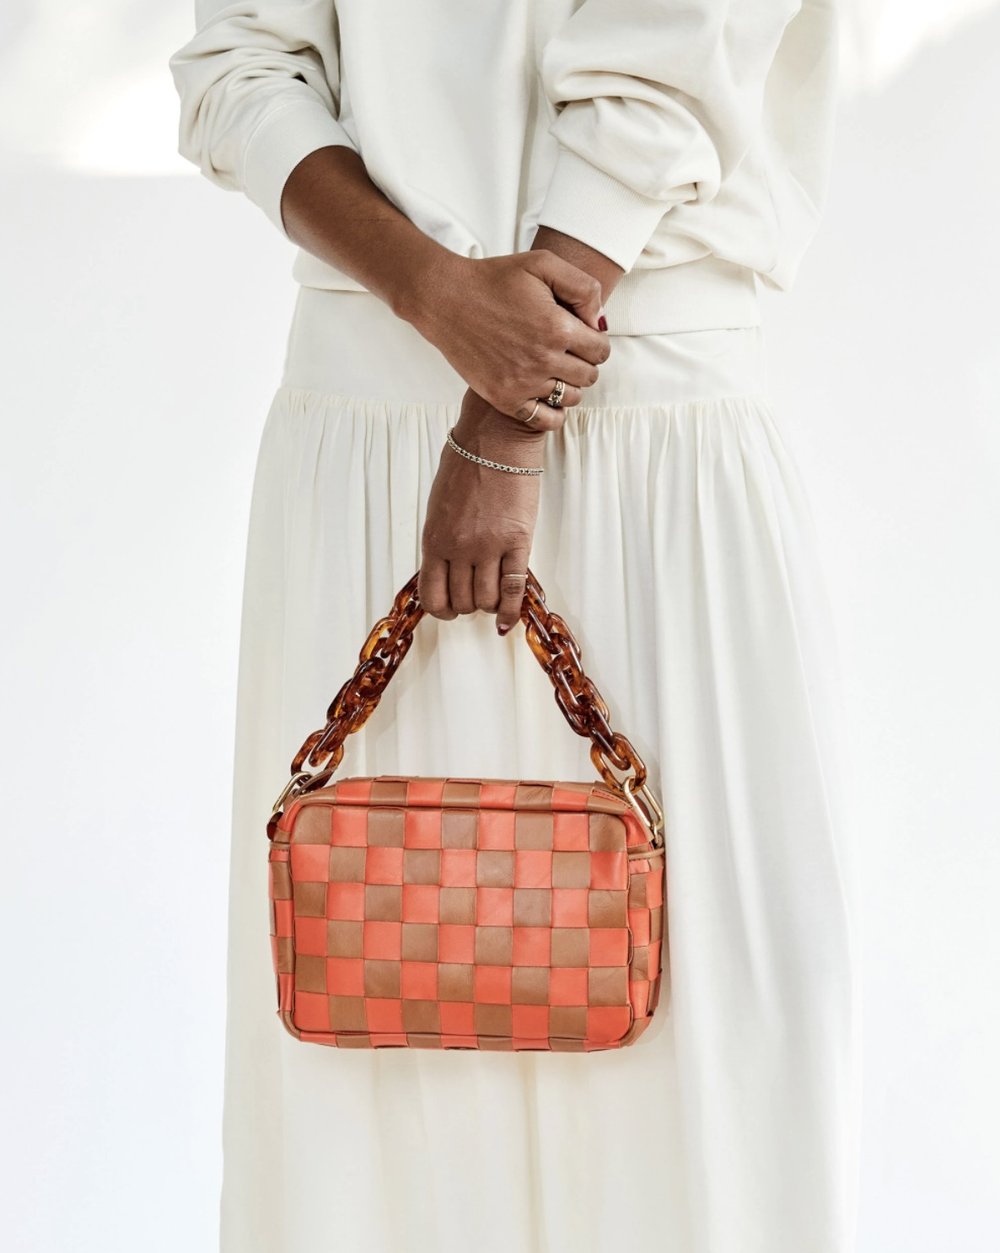 Clare V. Marisol Woven Leather Crossbody Bag in Red